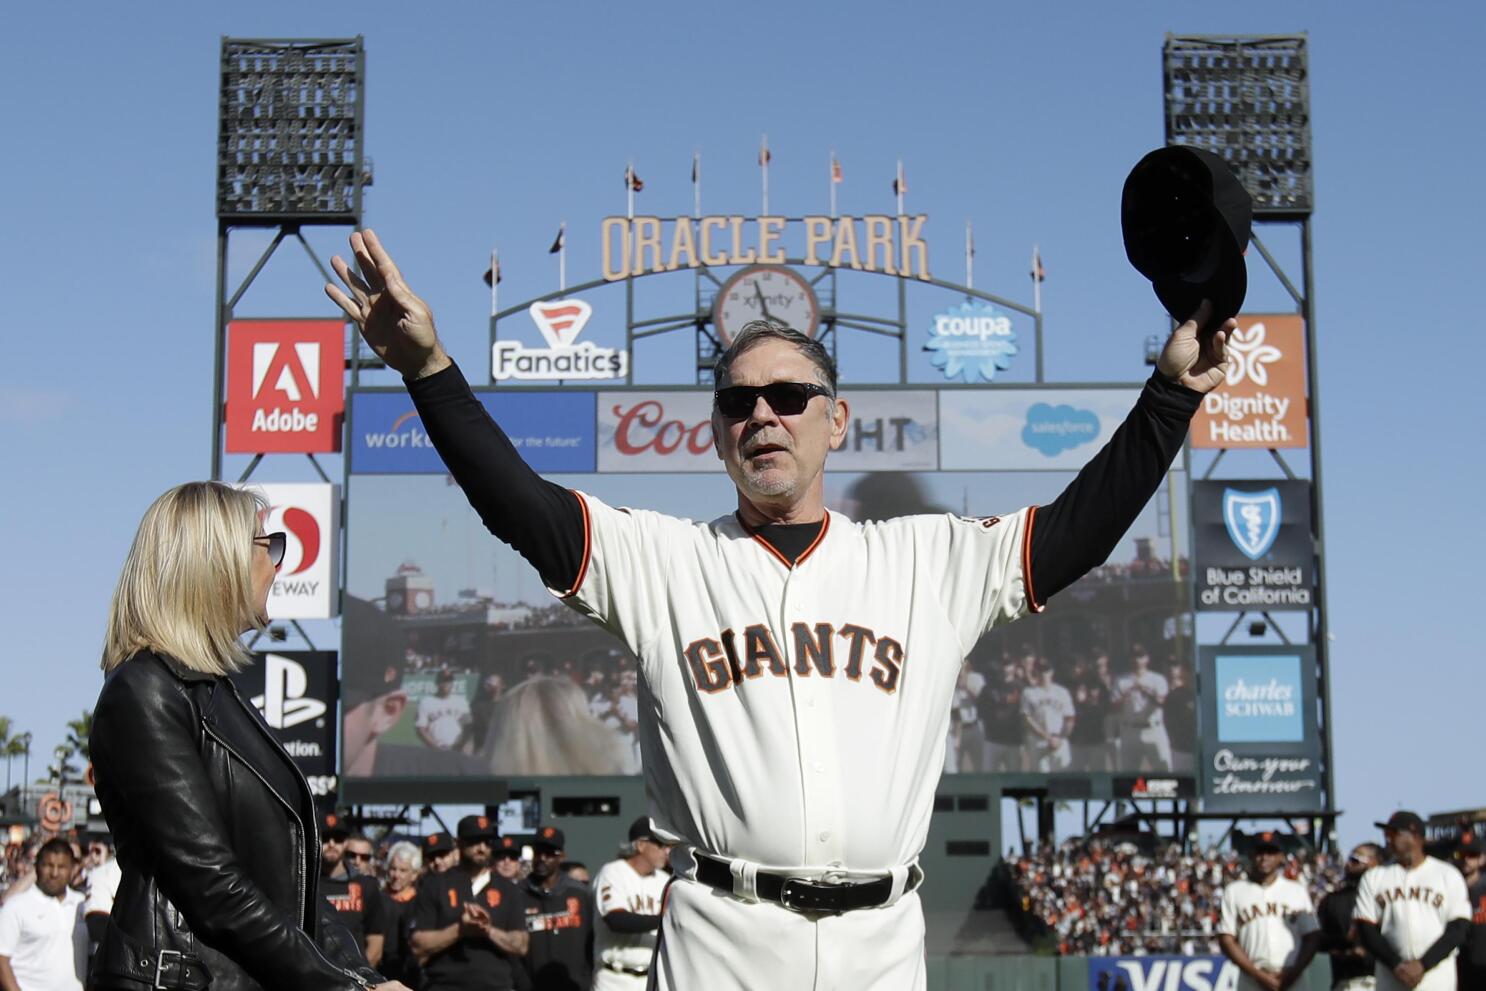 The San Francisco Giants just won the World Series again